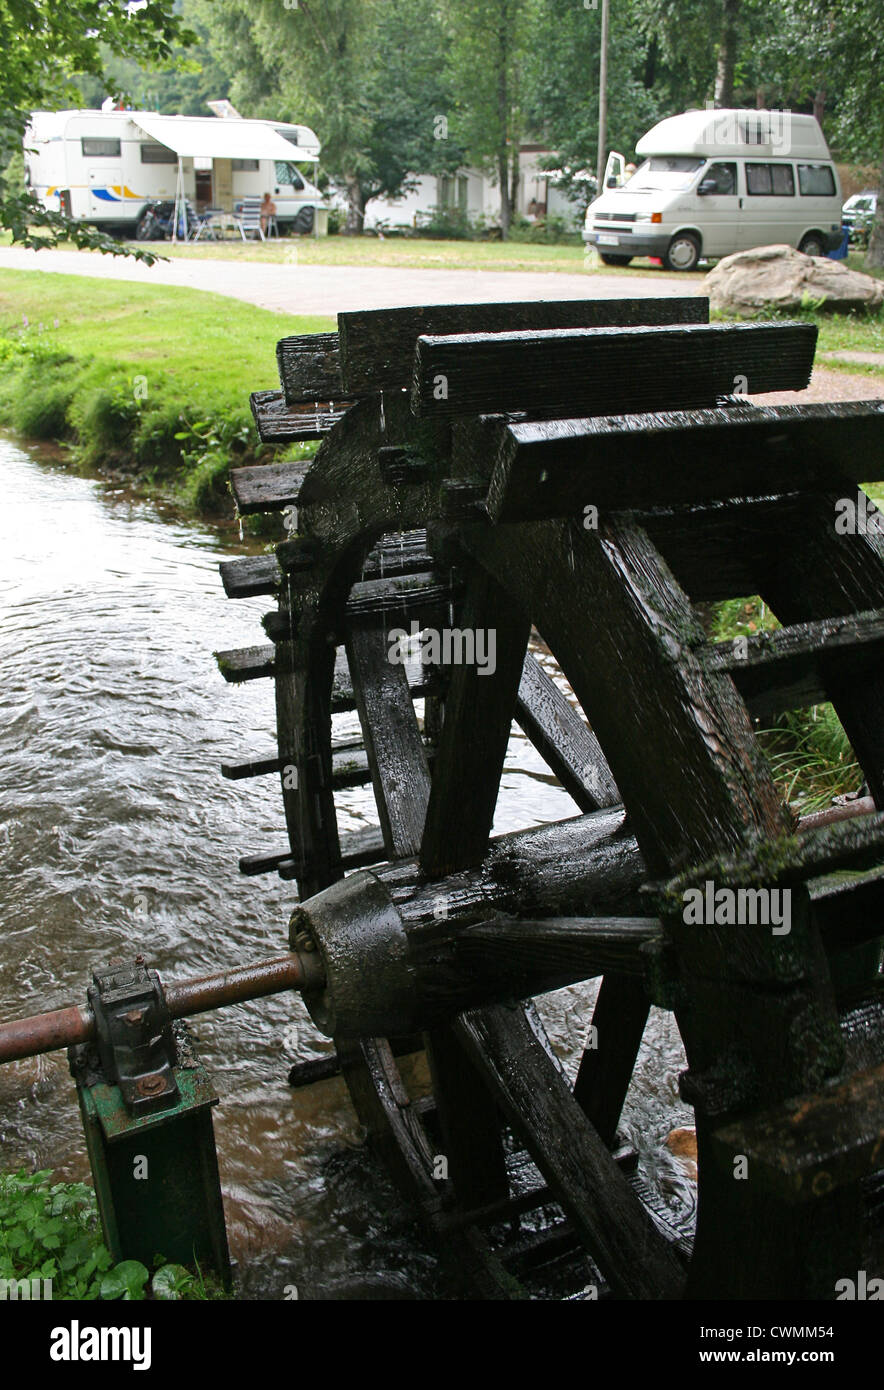 The waterwheel at Camping Clausensee, Clausen Lake,  Waldfischbach-Burgalben, Palatinate Forest, Rhine Valley, Germany Stock  Photo - Alamy